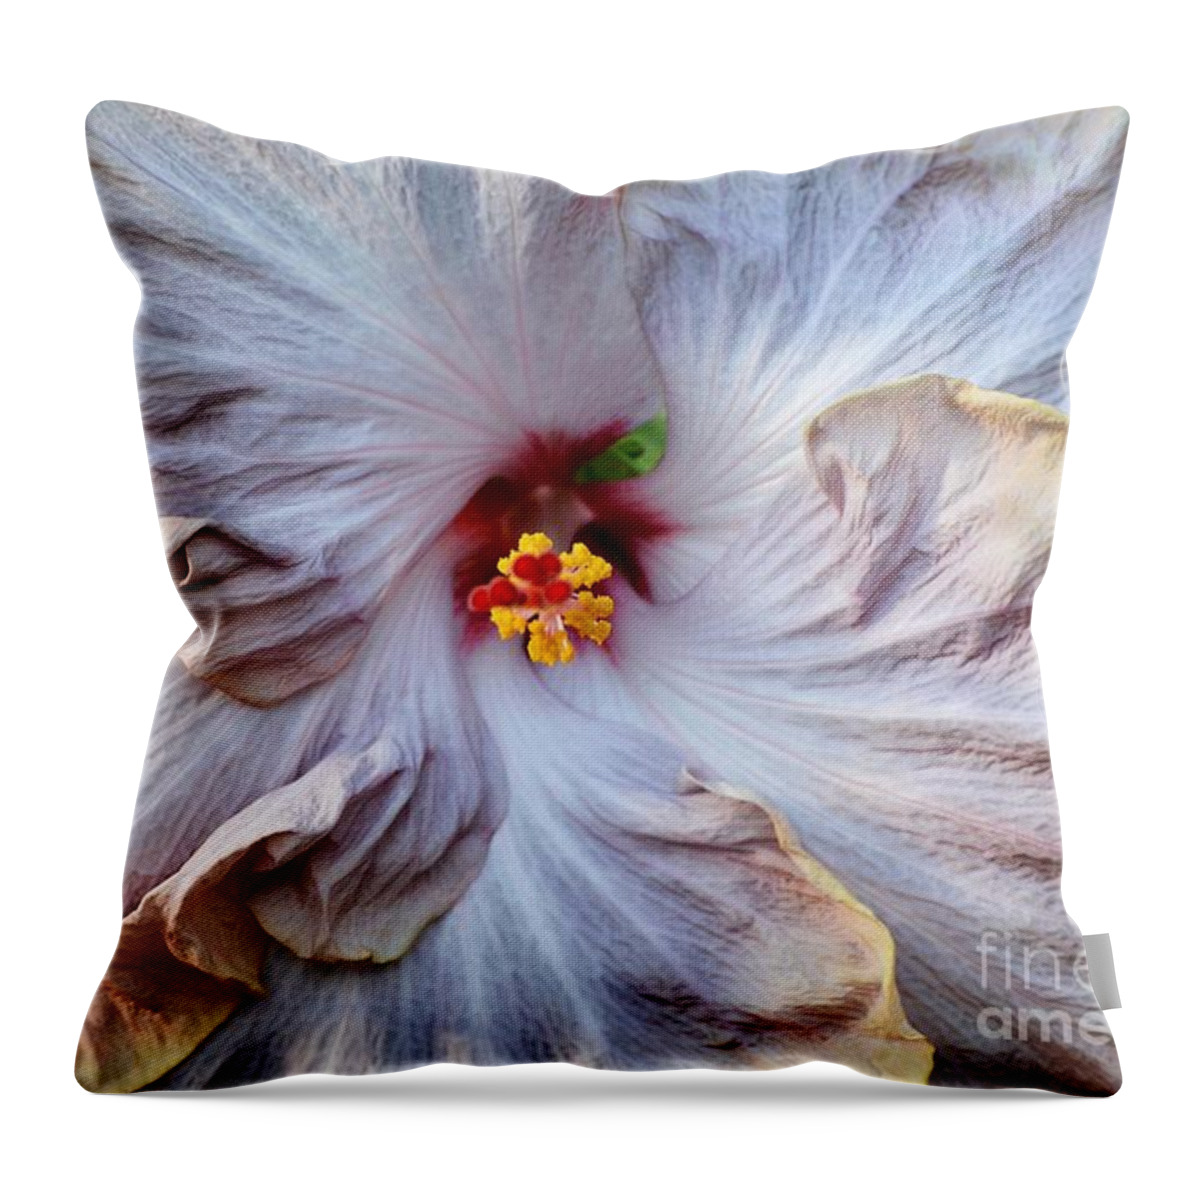 Flowers Throw Pillow featuring the photograph Muted Hibiscus by Cindy Manero